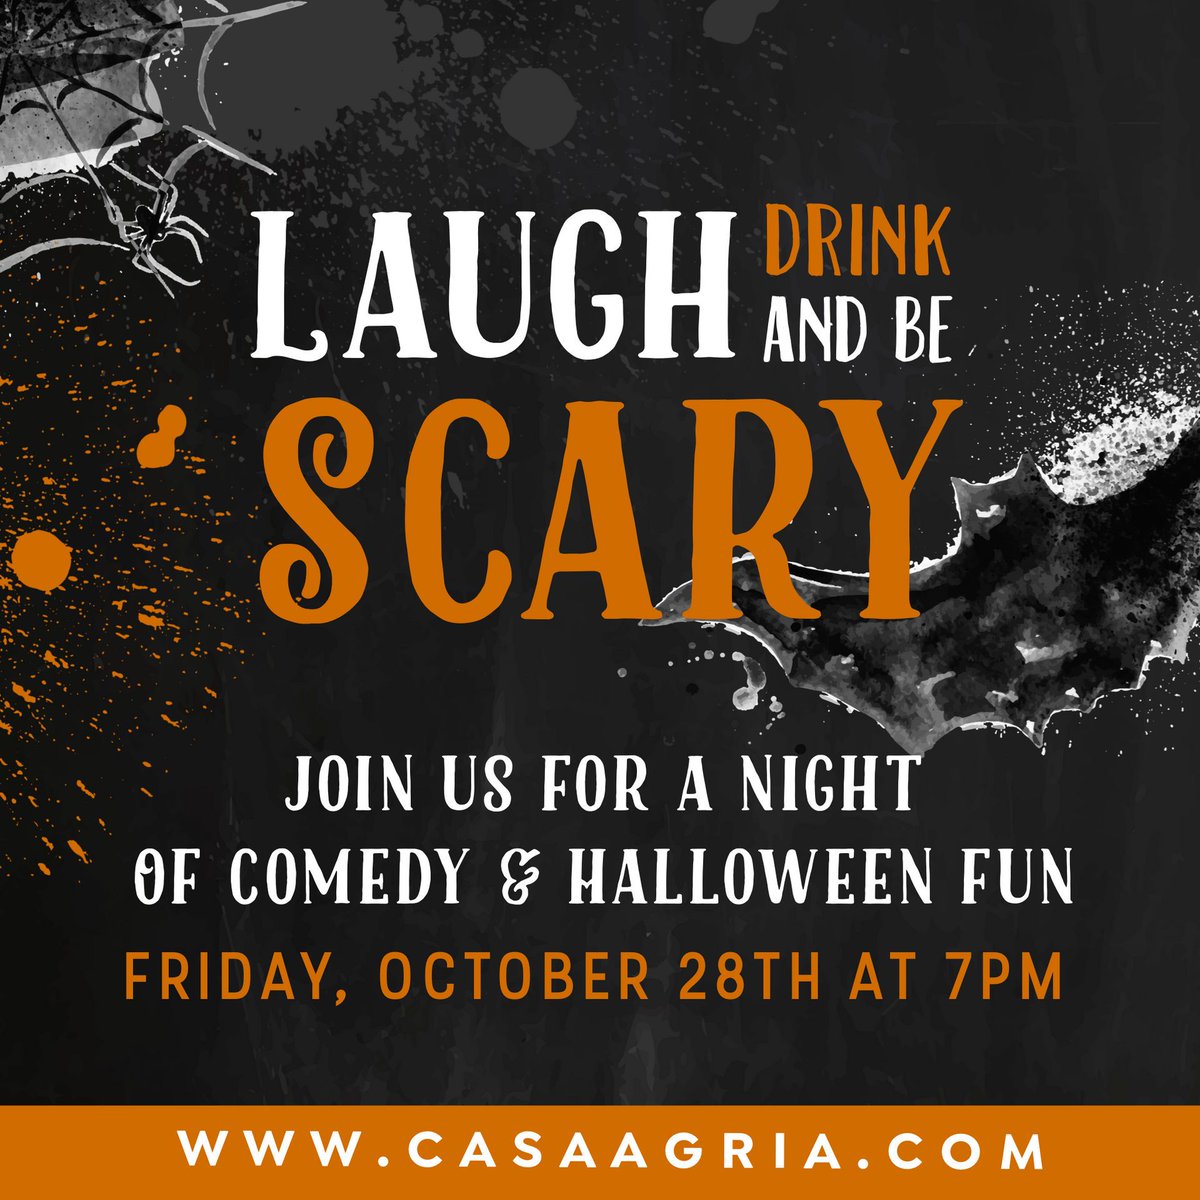 ///SAVE THE DATE/// FRIDAY, OCTOBER 28TH • 7PM Join us for an night of comedy & Halloween fun. We will have local comedians taking the stage, a costume contest with prizes, and Gourmet District food truck in the house. Mark your calendars and tell your friends.